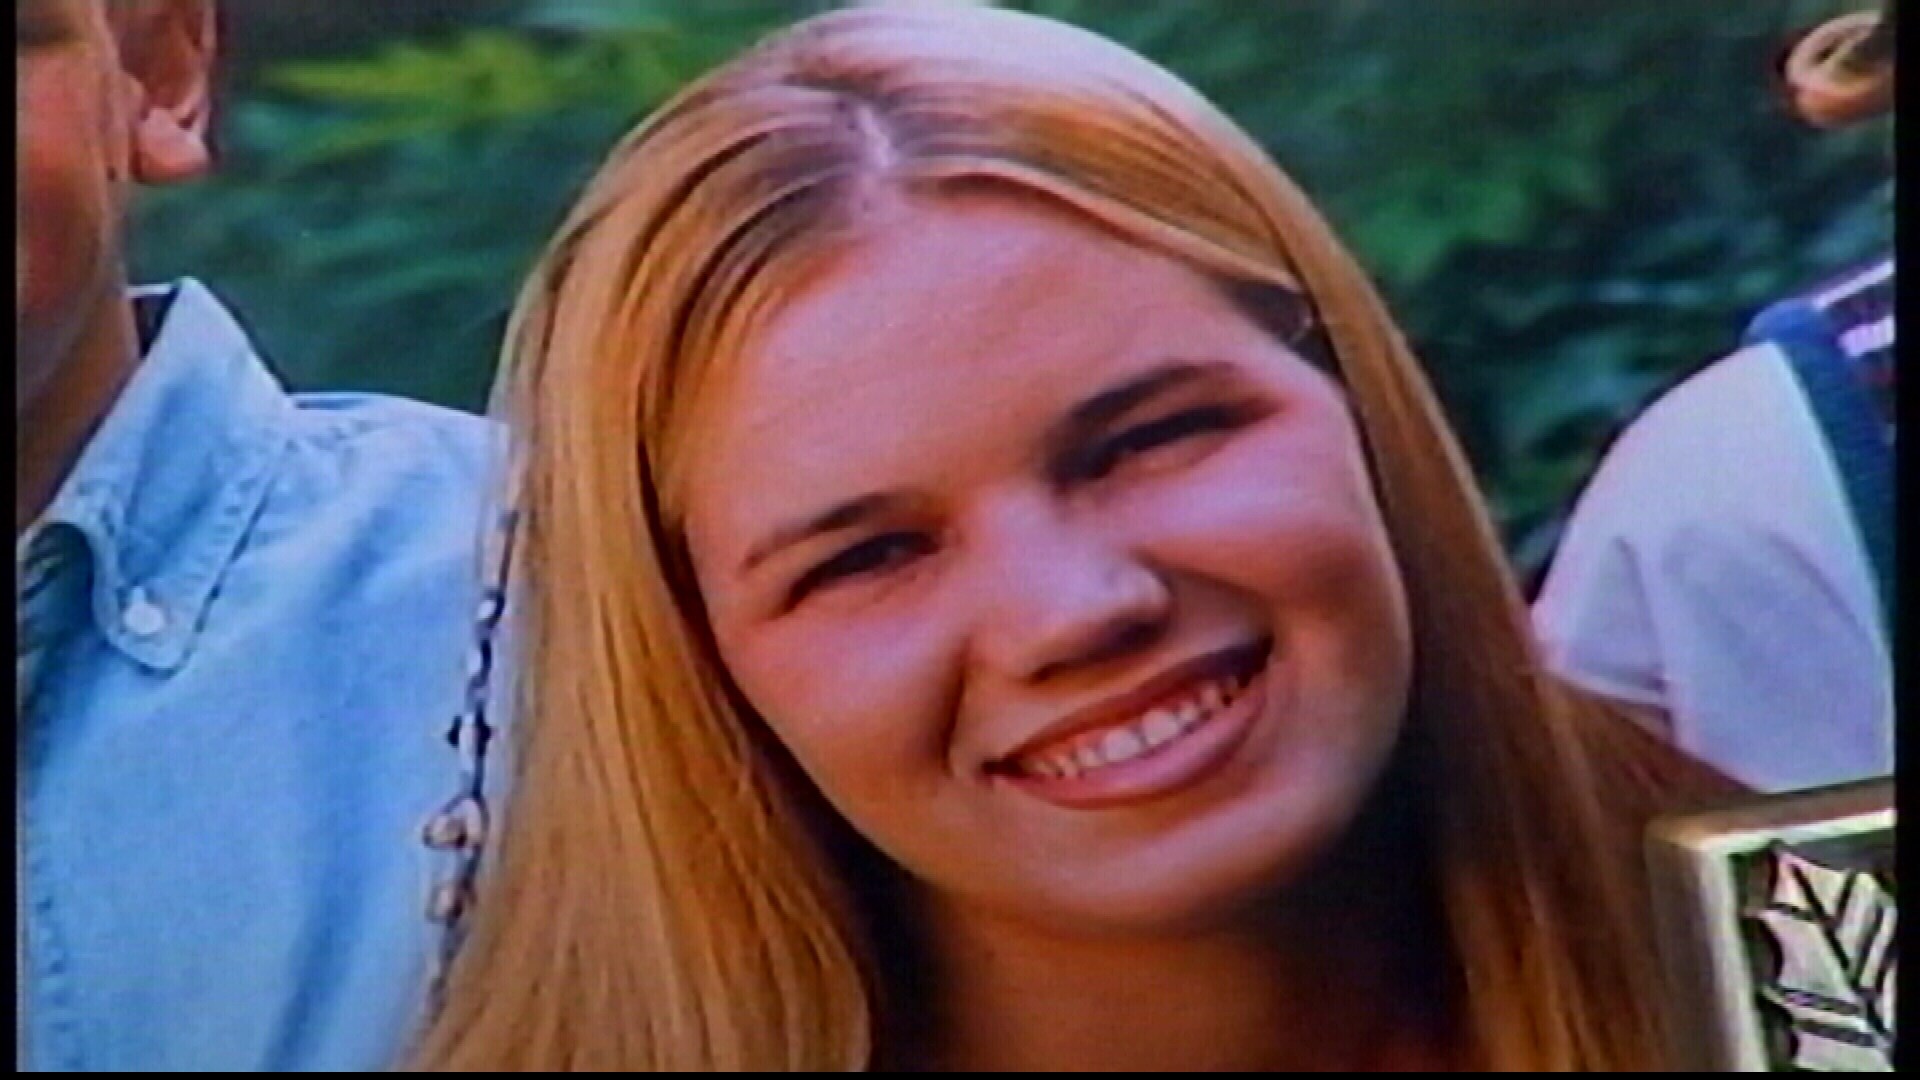 New Lead In 20-Year-Old Cold Murder Case (Photos)